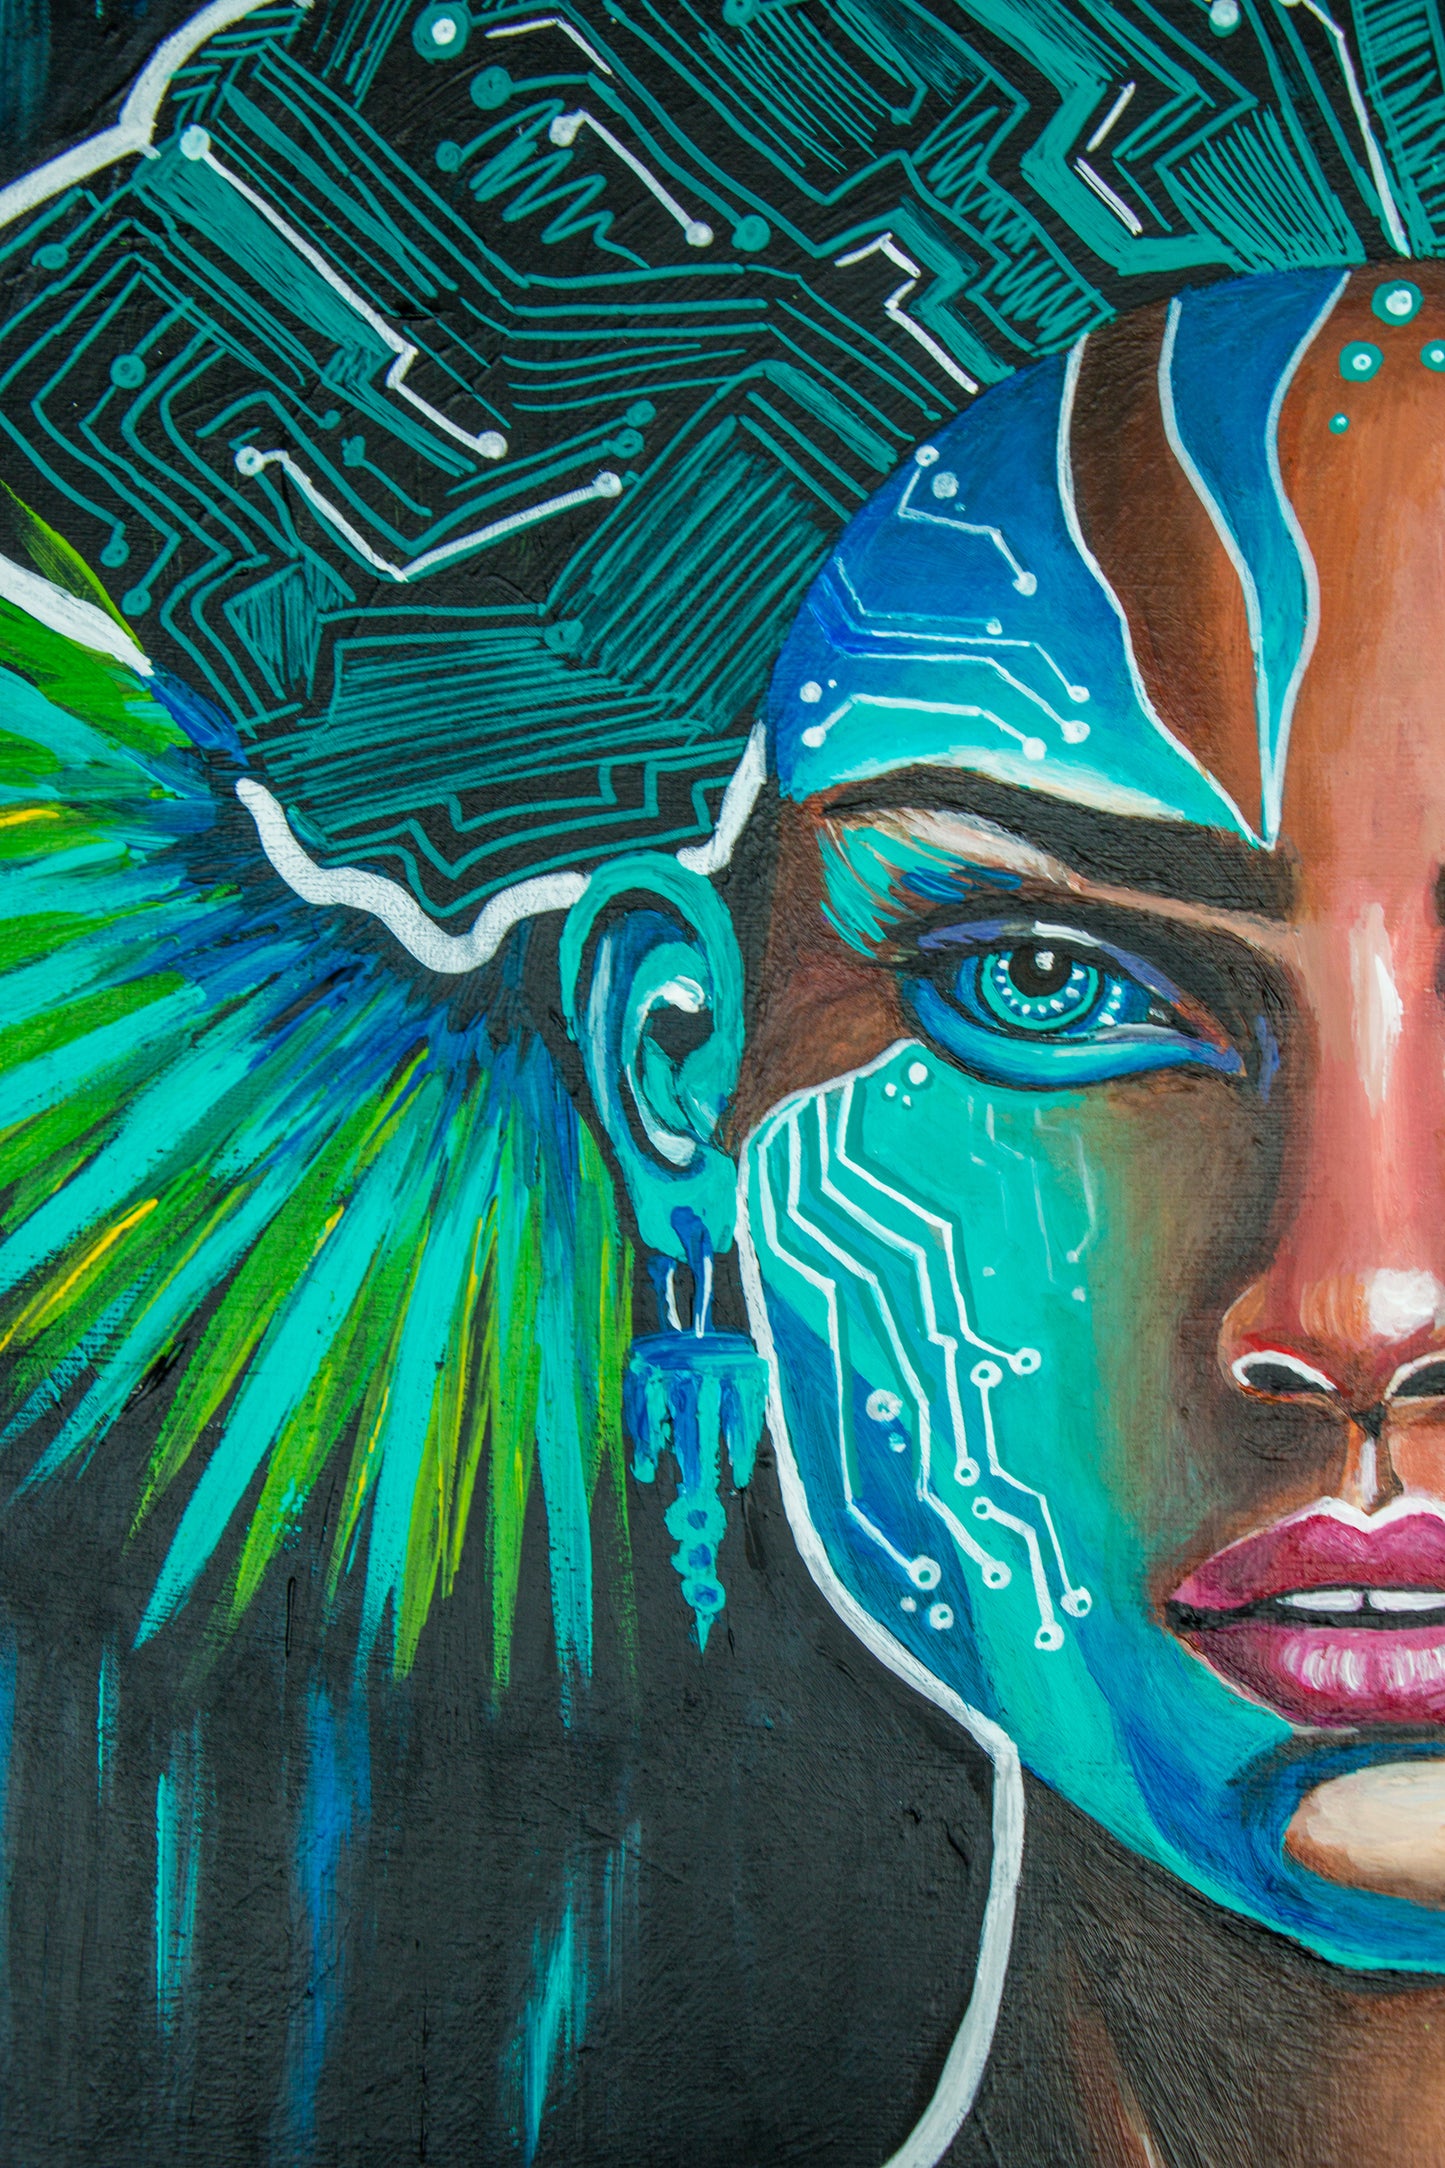 AI Woman Artwork Painted with Acrylics Synthesis of Natural and Artificial Intelligence Art